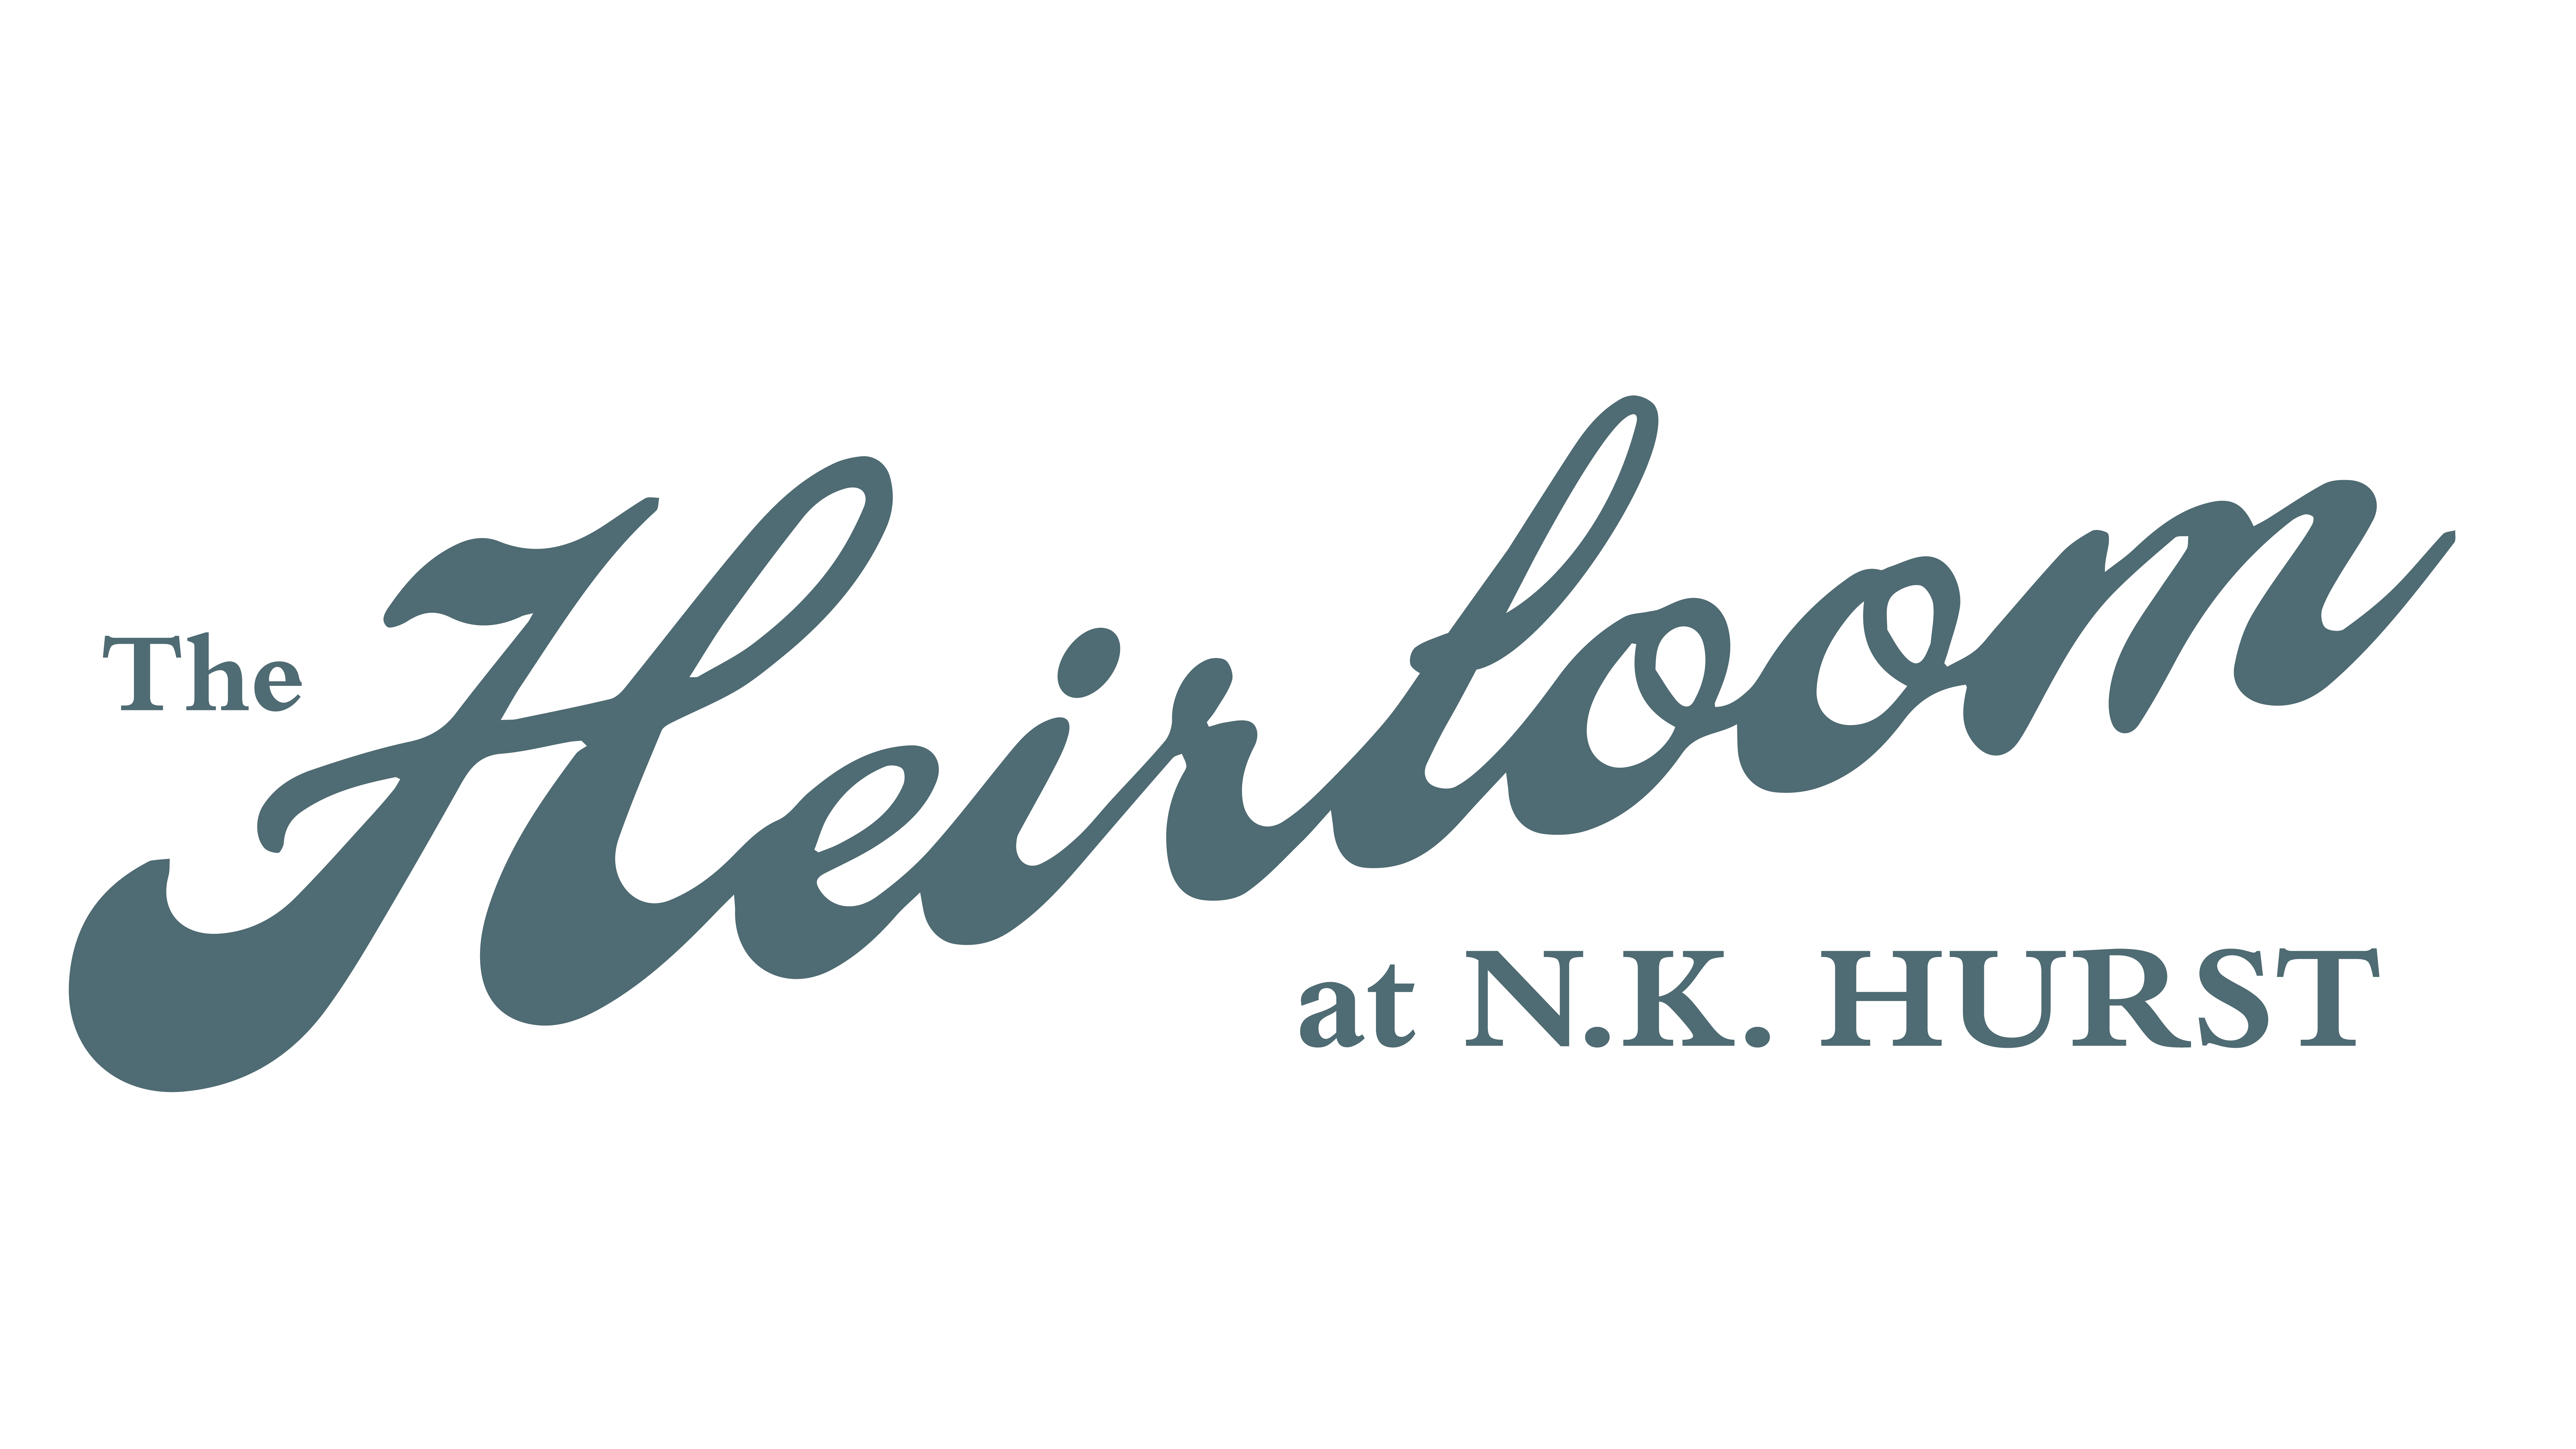 THE HEIRLOOM at N. K. Hurst - Modern Indianapolis Event Venue with Vintage Charm